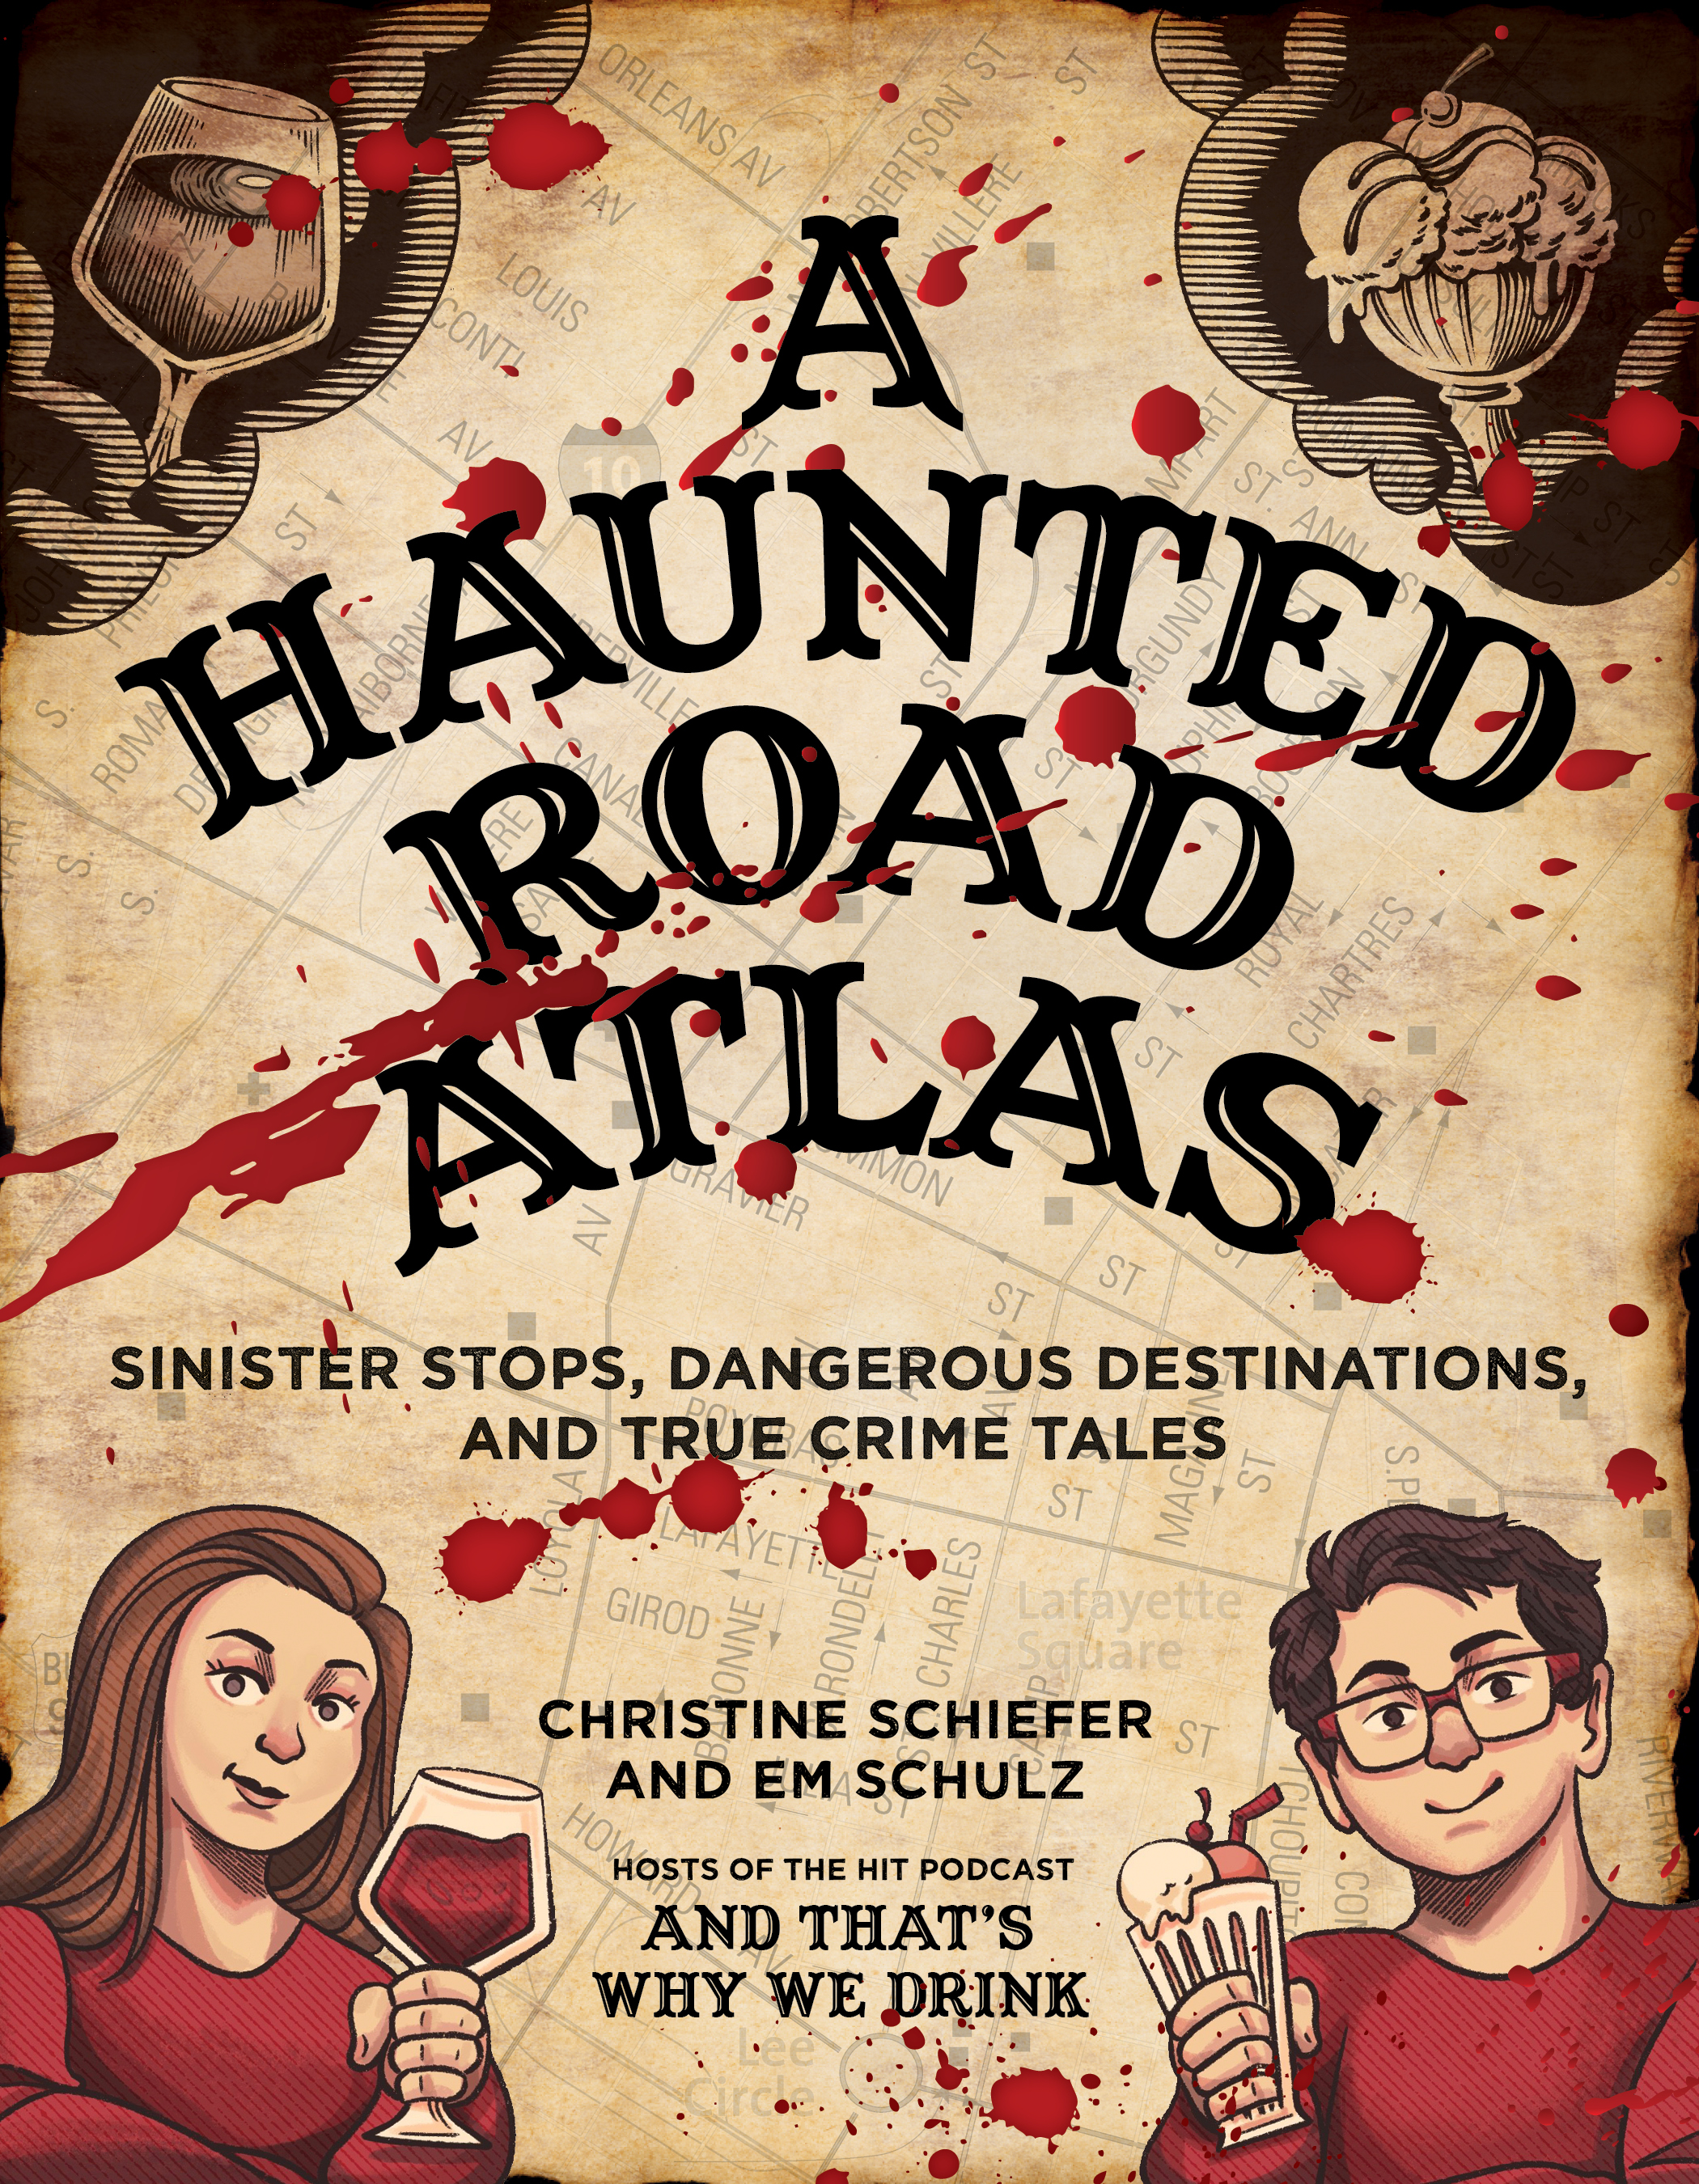 A Haunted Road Atlas Sinister Stops, Dangerous Destinations, and True Crime Tales